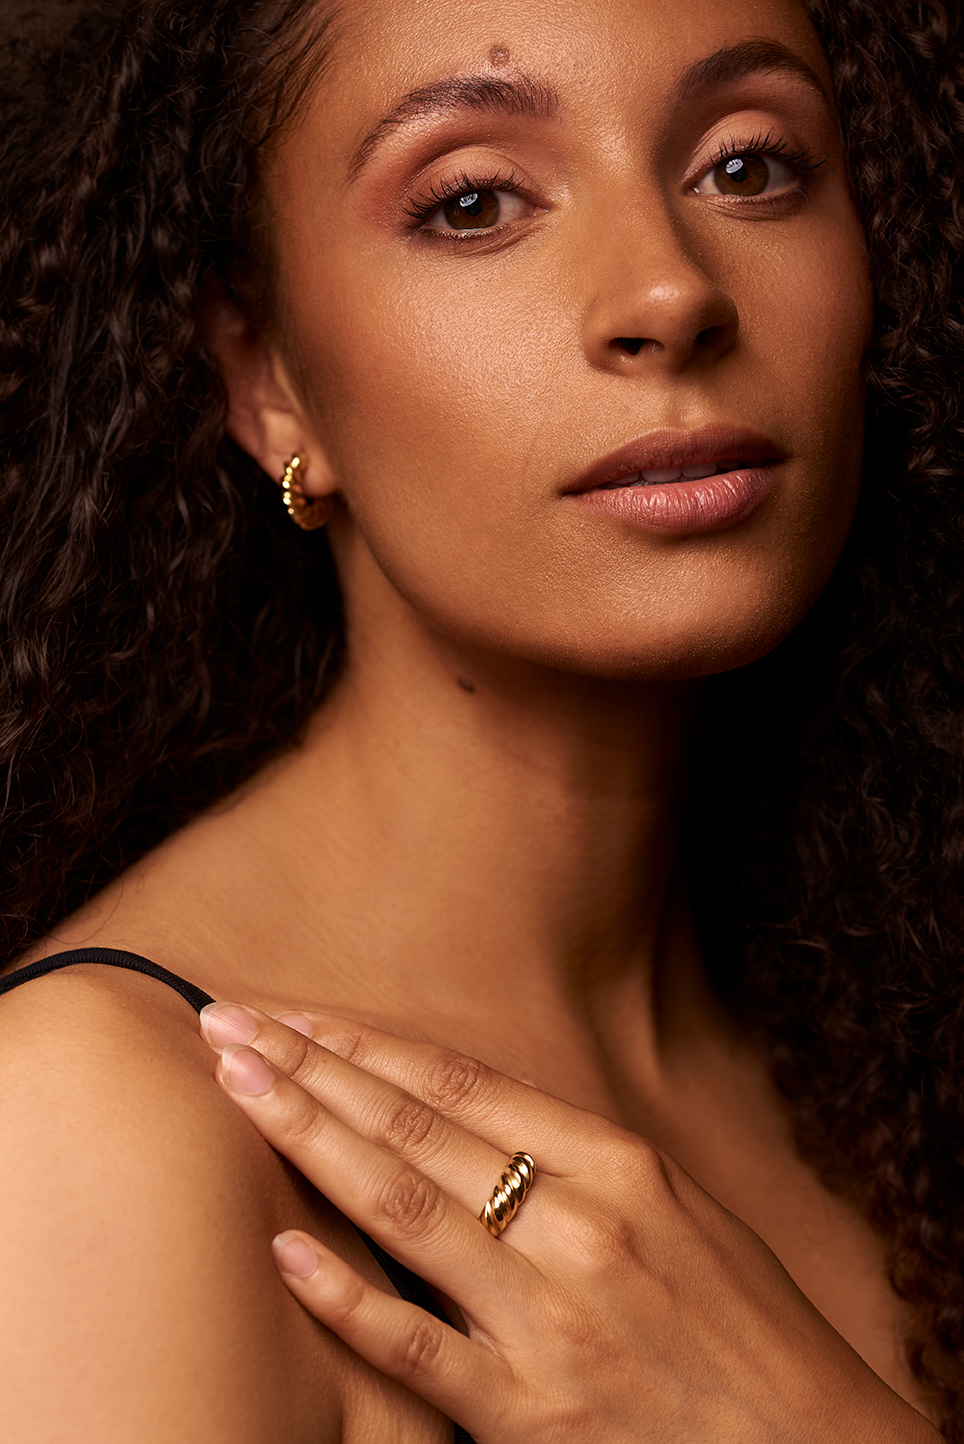 Model holding her hand on her shoulder to showcase her earring and ring.